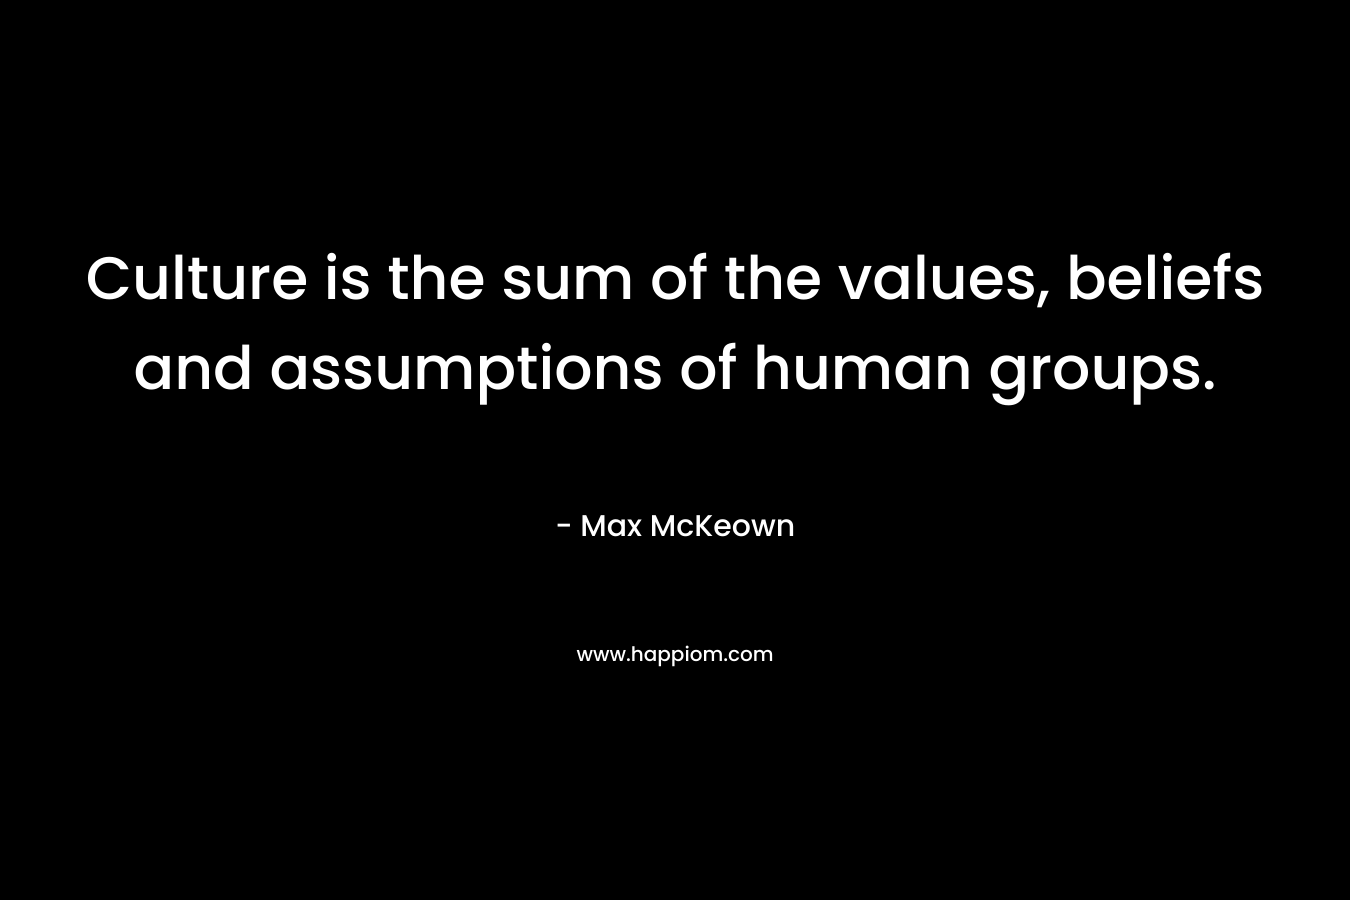 Culture is the sum of the values, beliefs and assumptions of human groups.